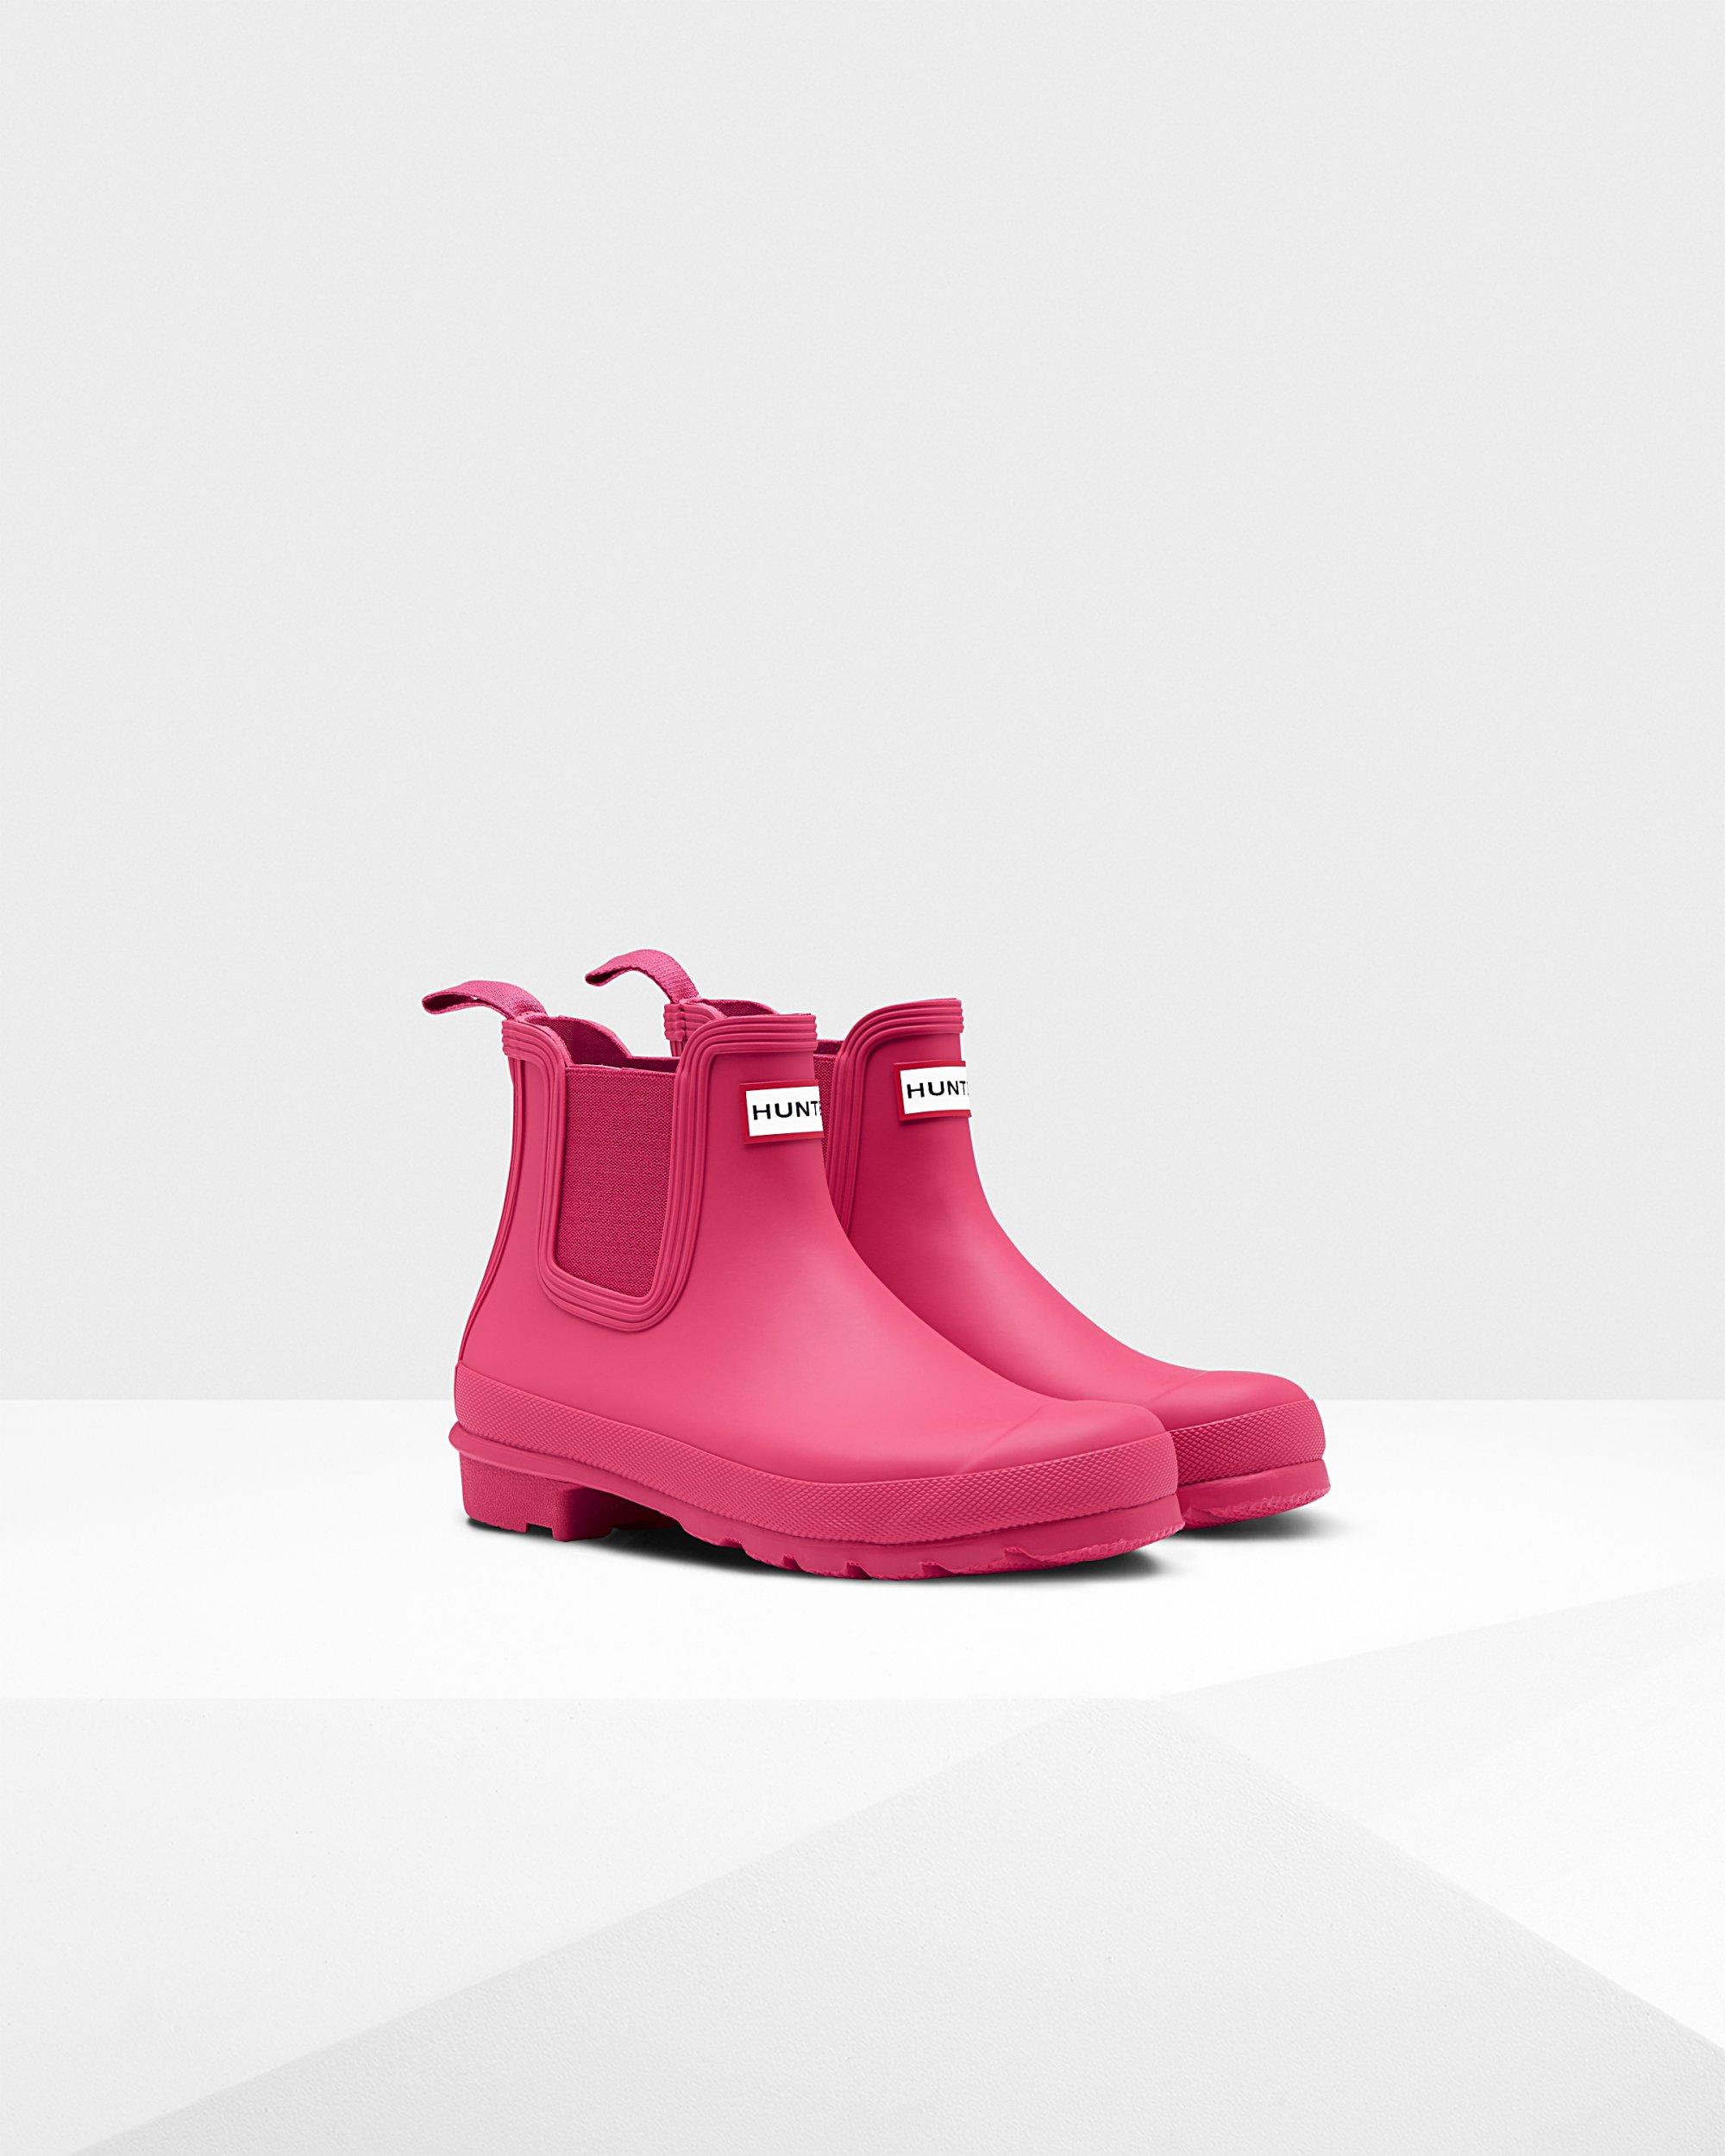 HUNTER Rubber Women's Original Chelsea Boots in Bright Pink (Pink 